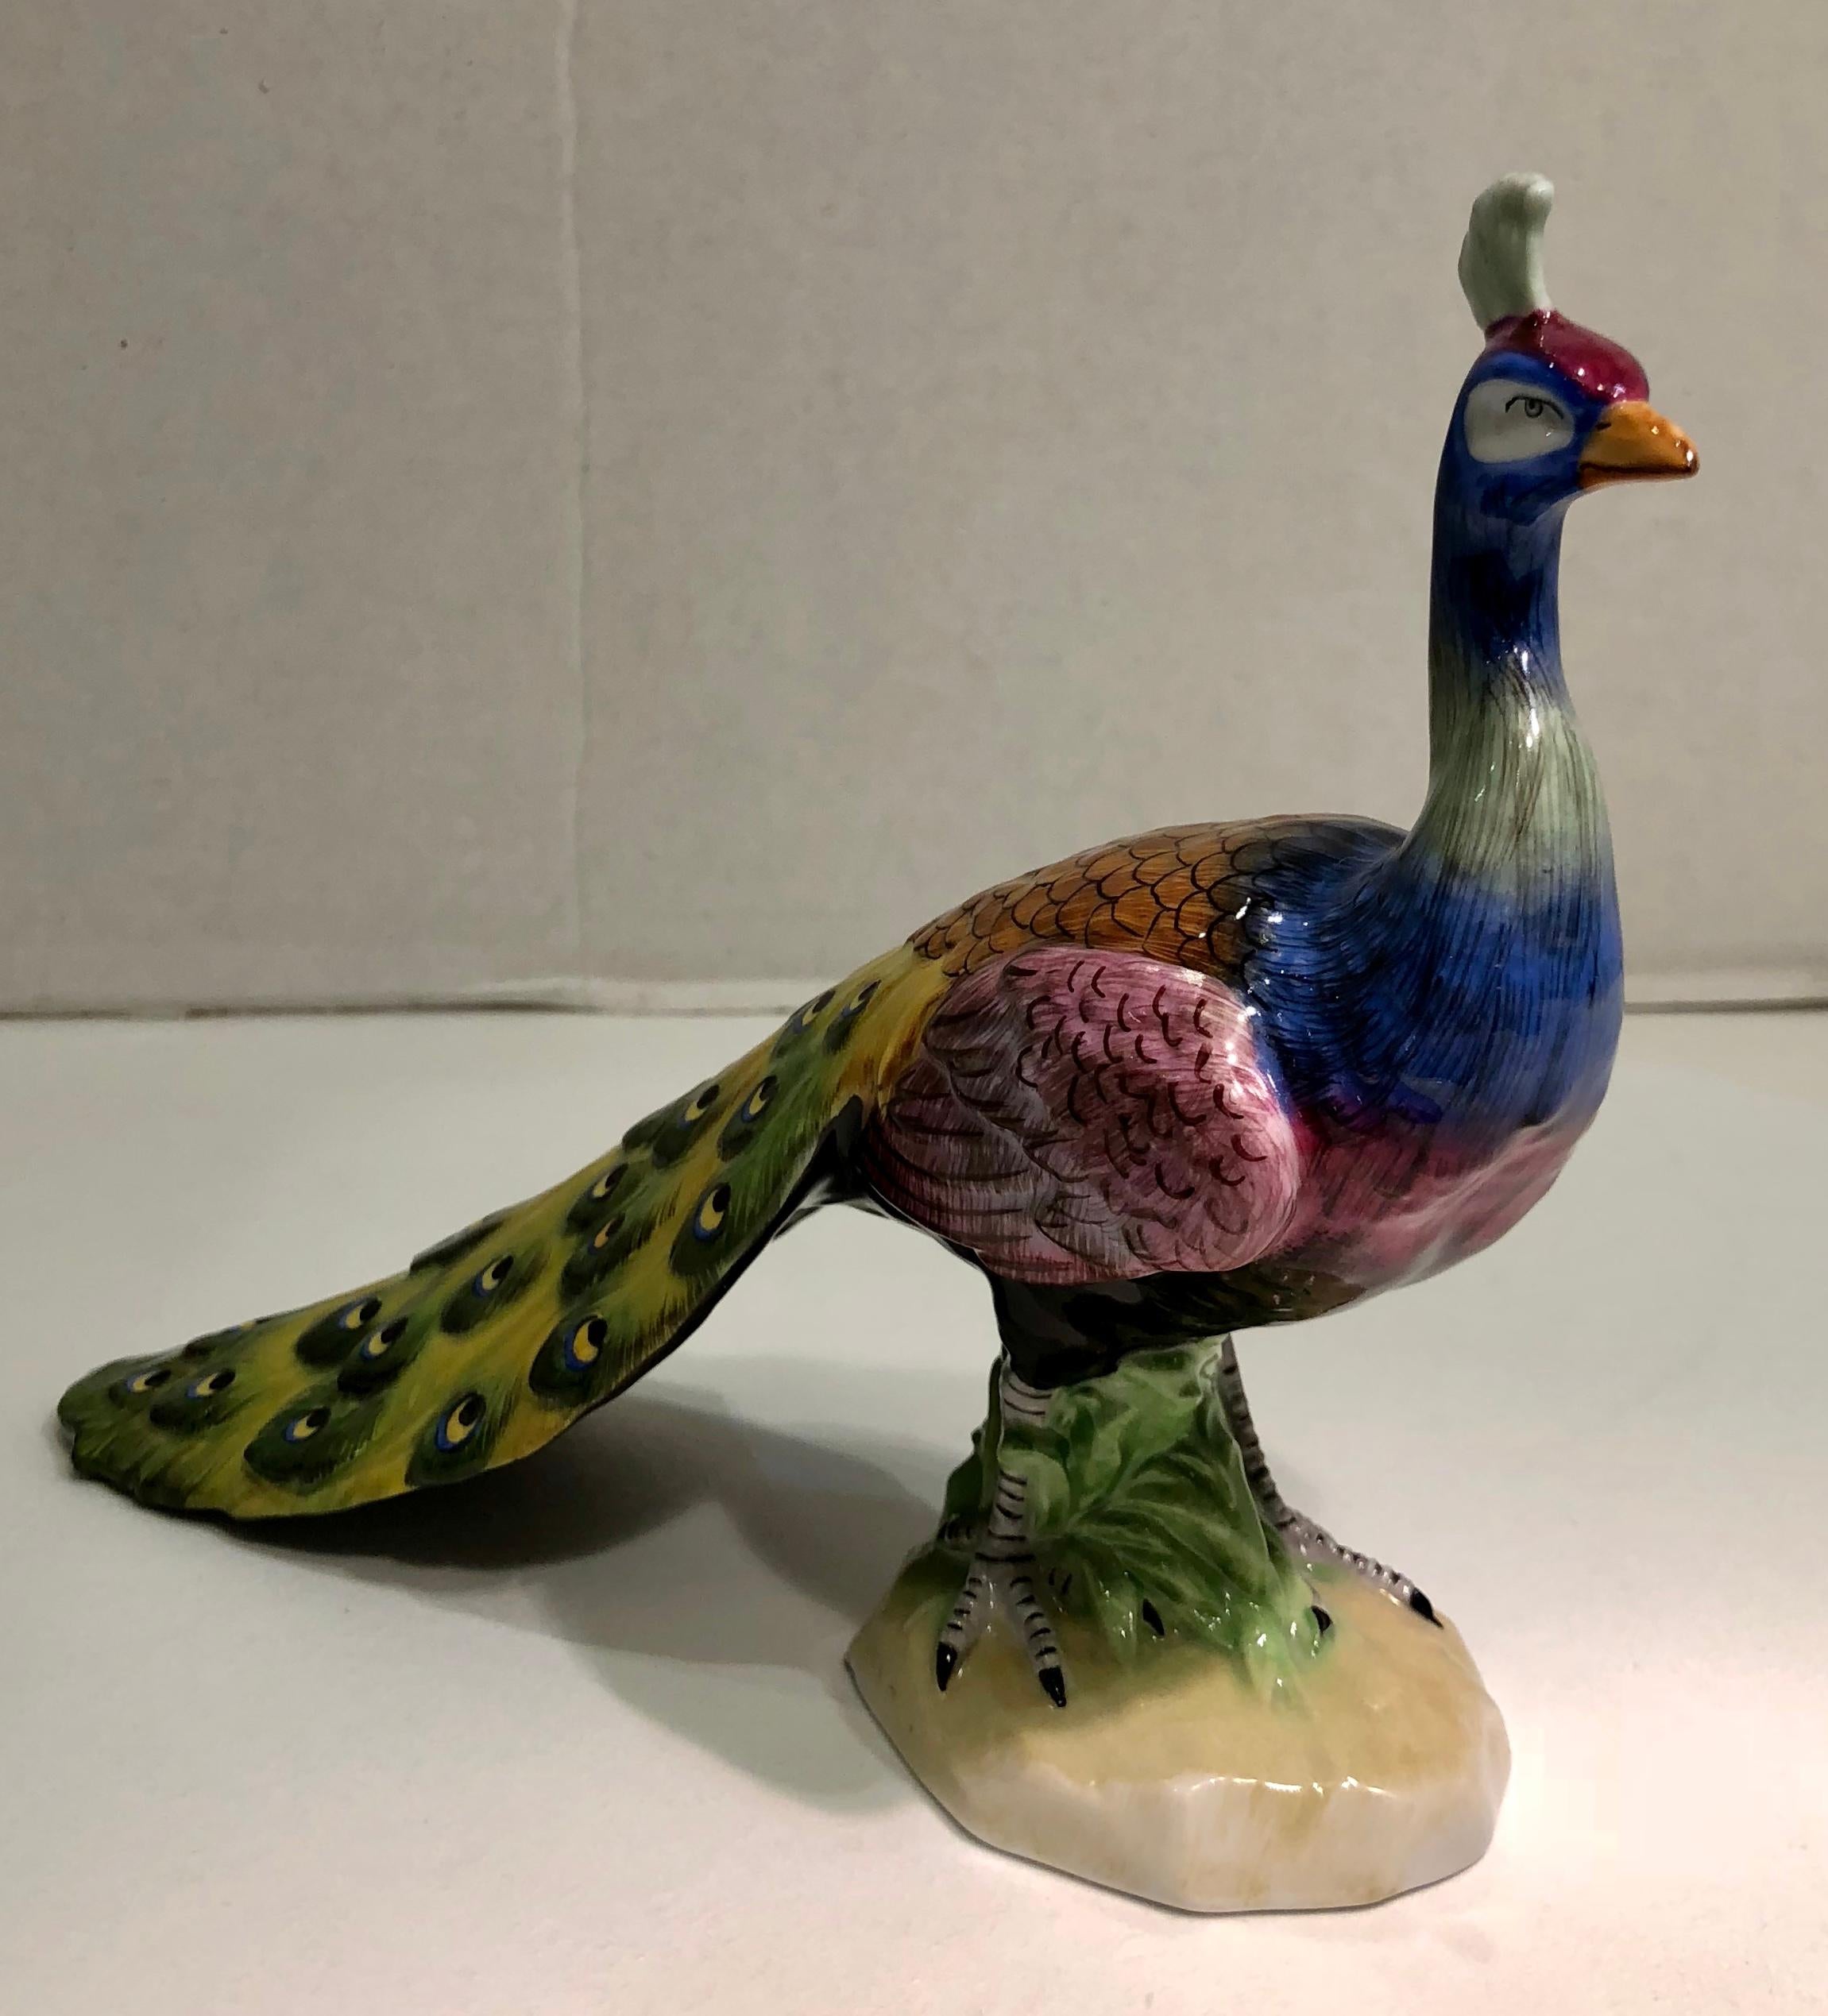 Allemand Exquise Dresden Porcelain Peacock Tail Closed Facing Forward Figurine Germany en vente